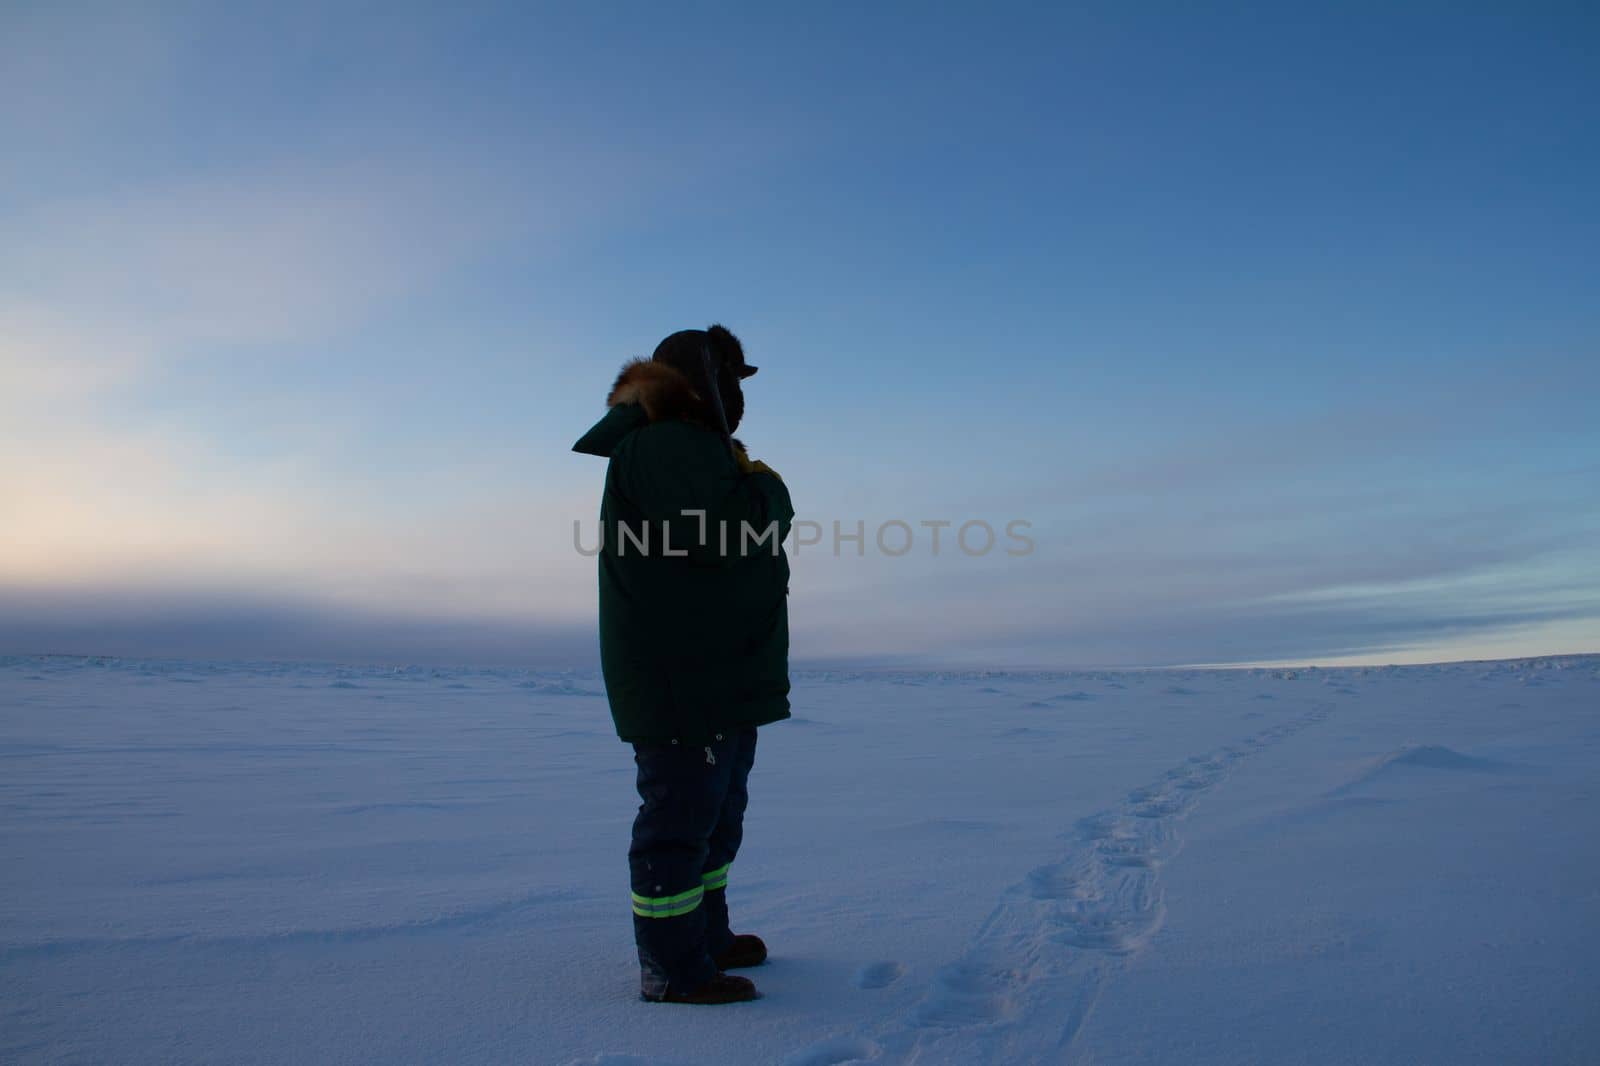 Man in winter clothing standing on snow watching the weather on tundra landscape while holding a rifle by Granchinho